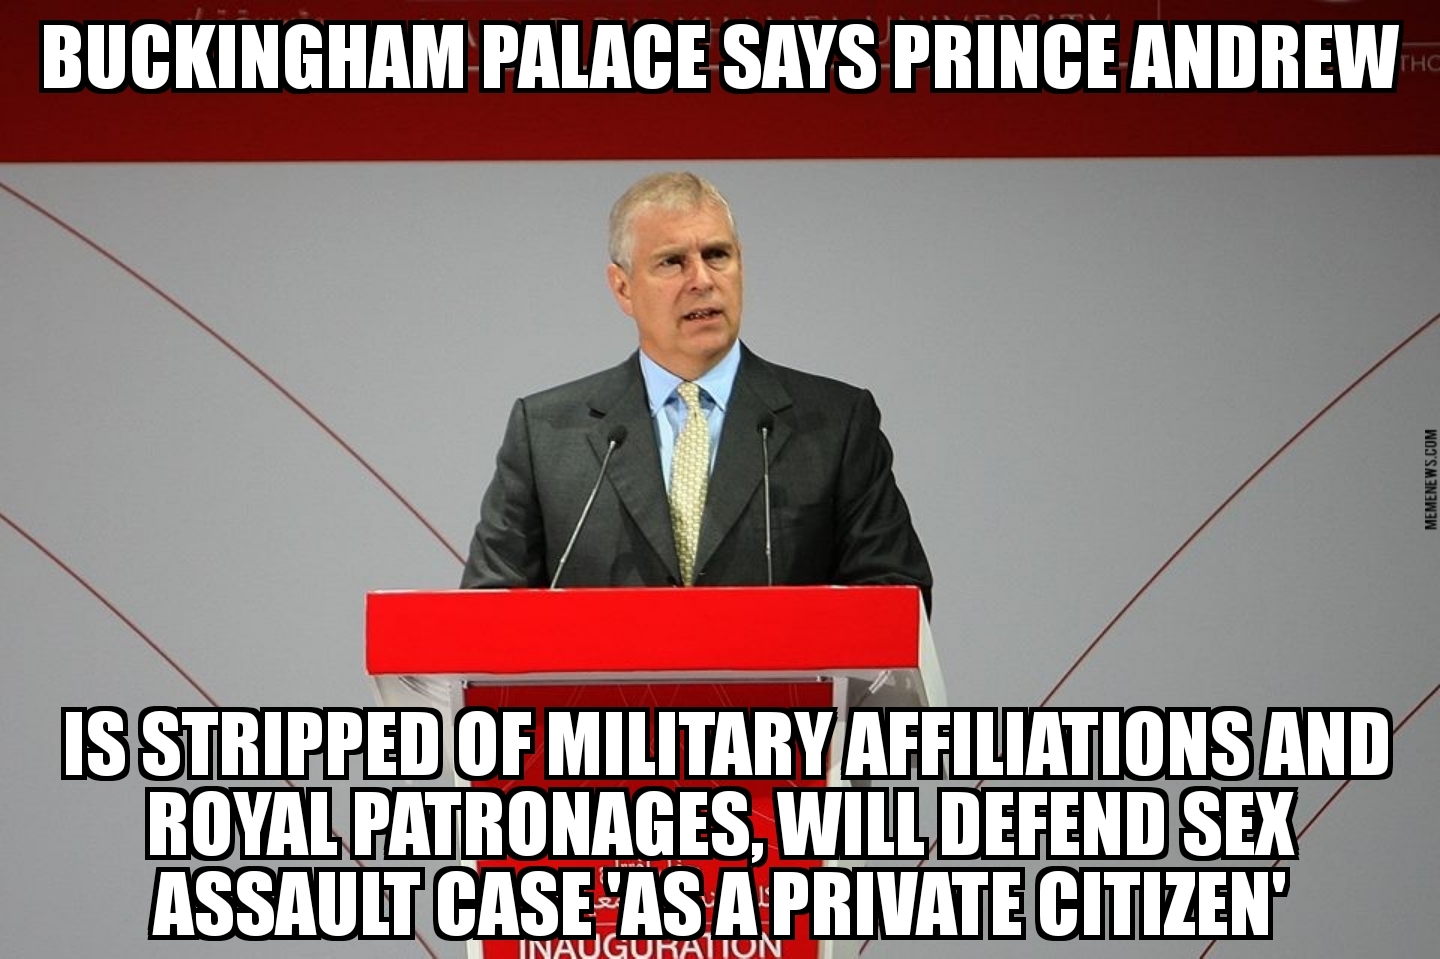 Prince Andrew stripped of Royal patronages